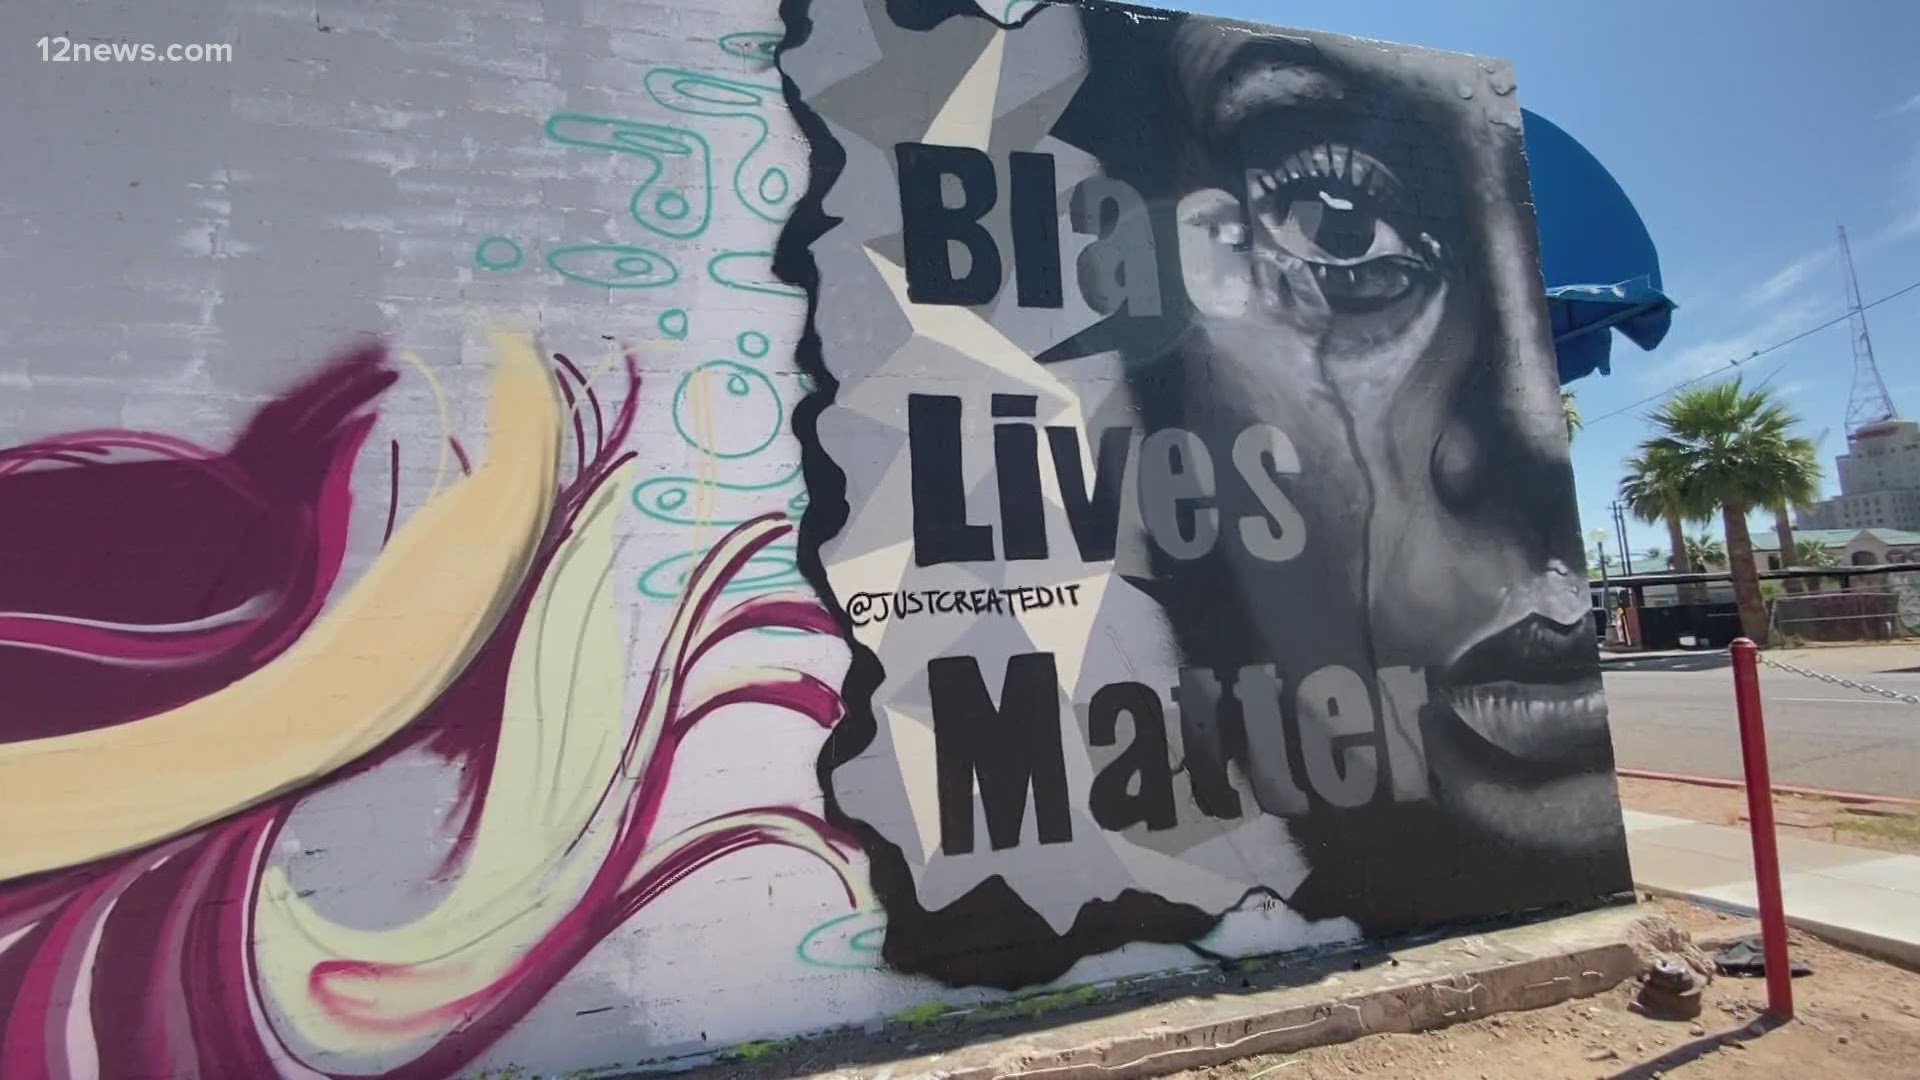 Valley artists are sharing the words "Black Lives Matter" on murals as a way to connect the message with people. They're hoping to end racial injustice through art.